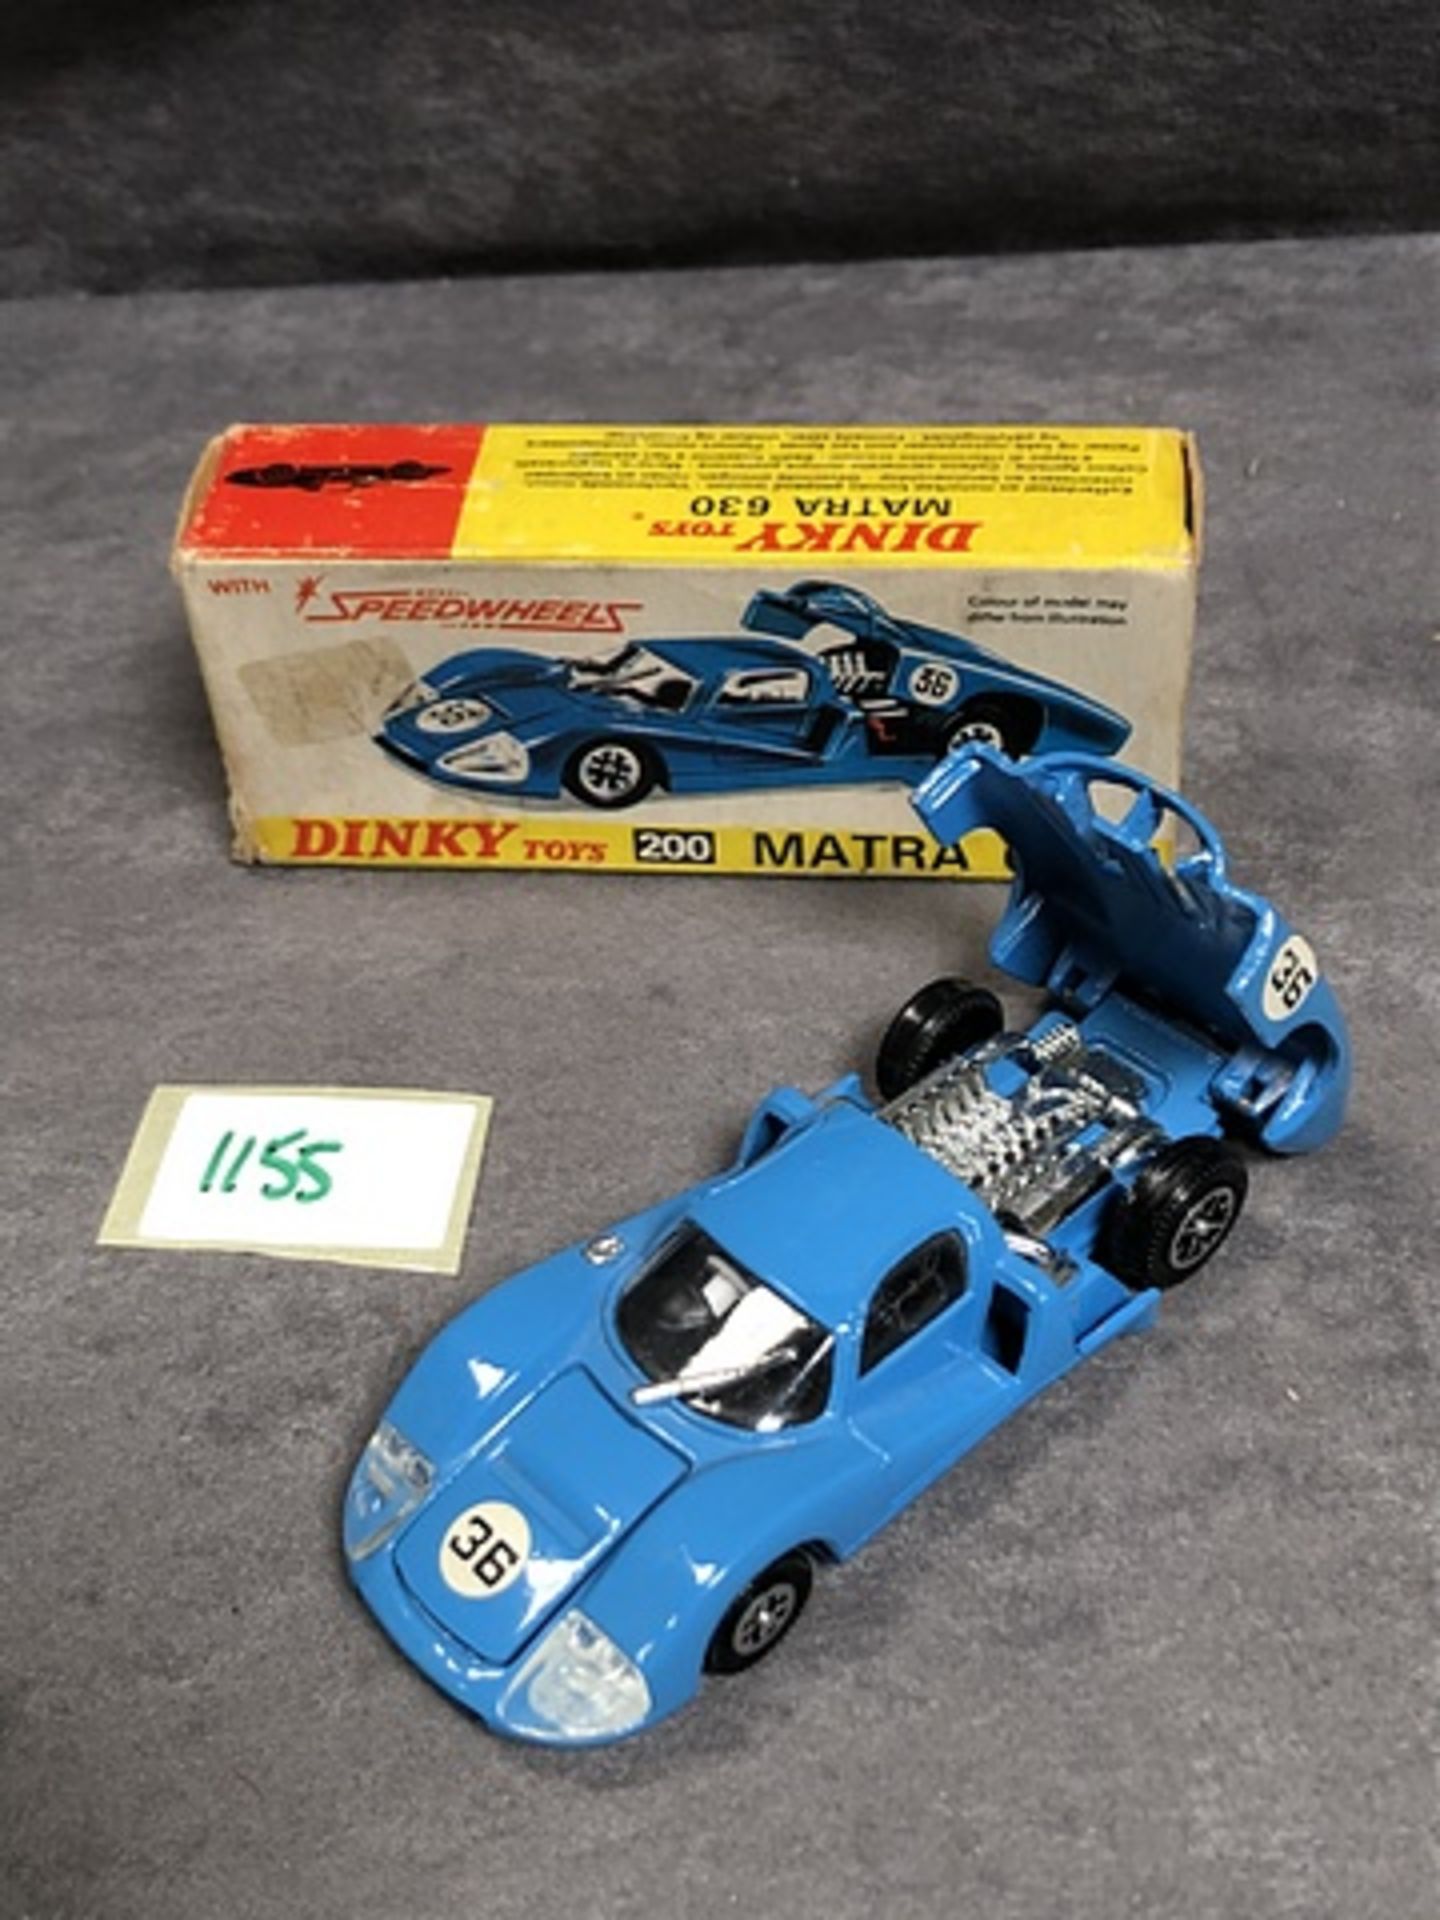 Dinky Toys Diecast #200 Matra 630 Mint condition model in a box